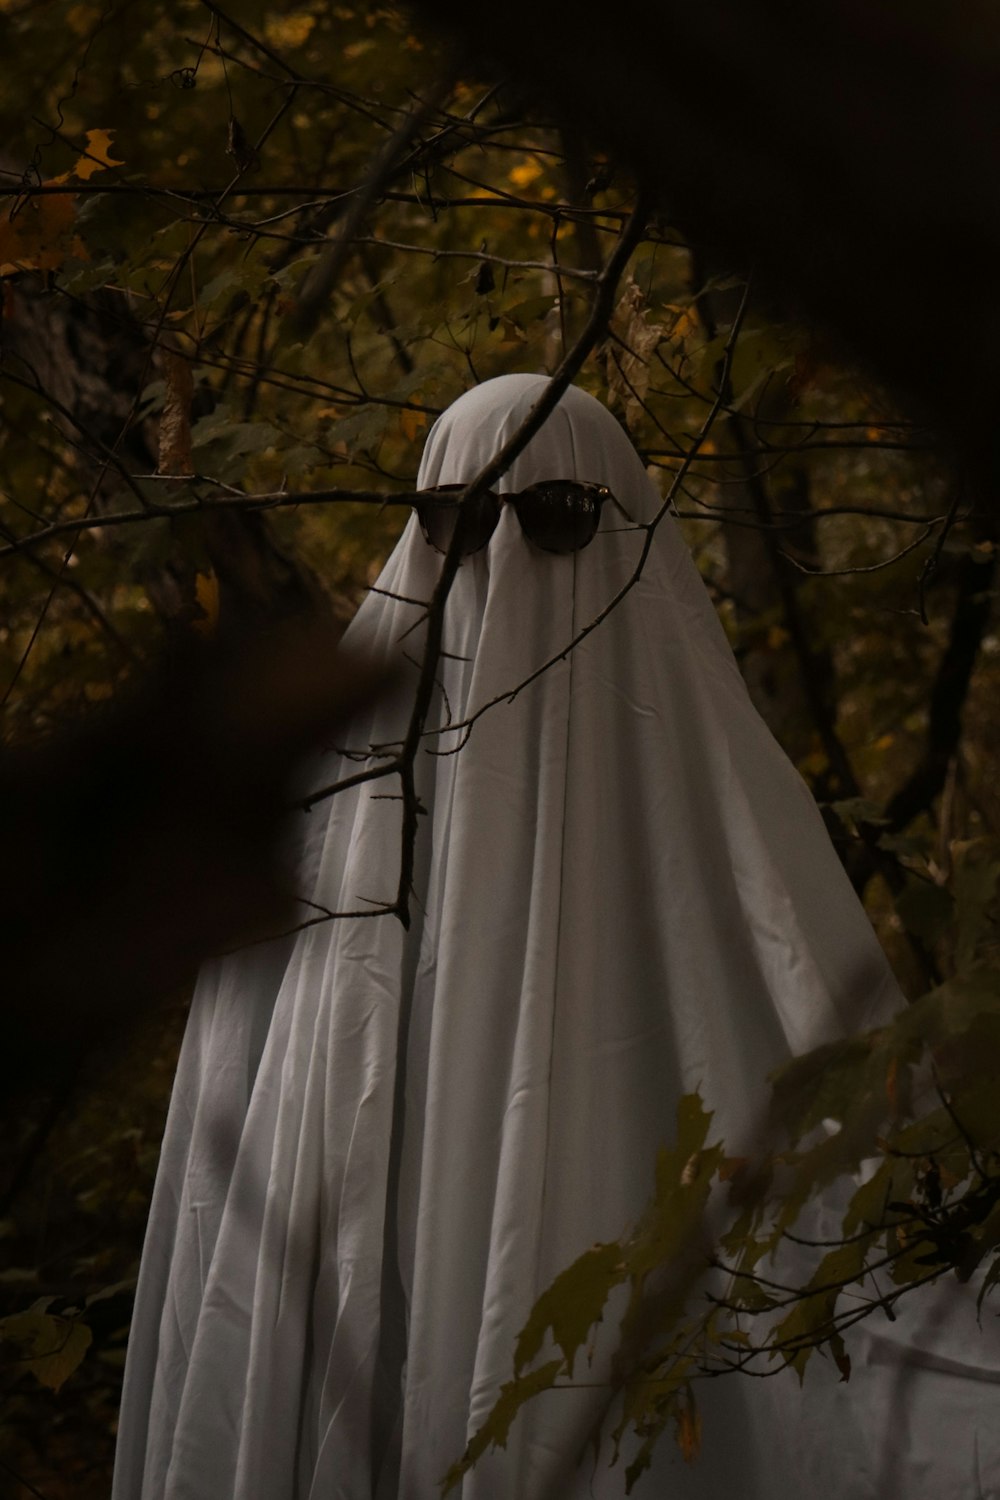 a ghostly person wearing sunglasses and a white cloak